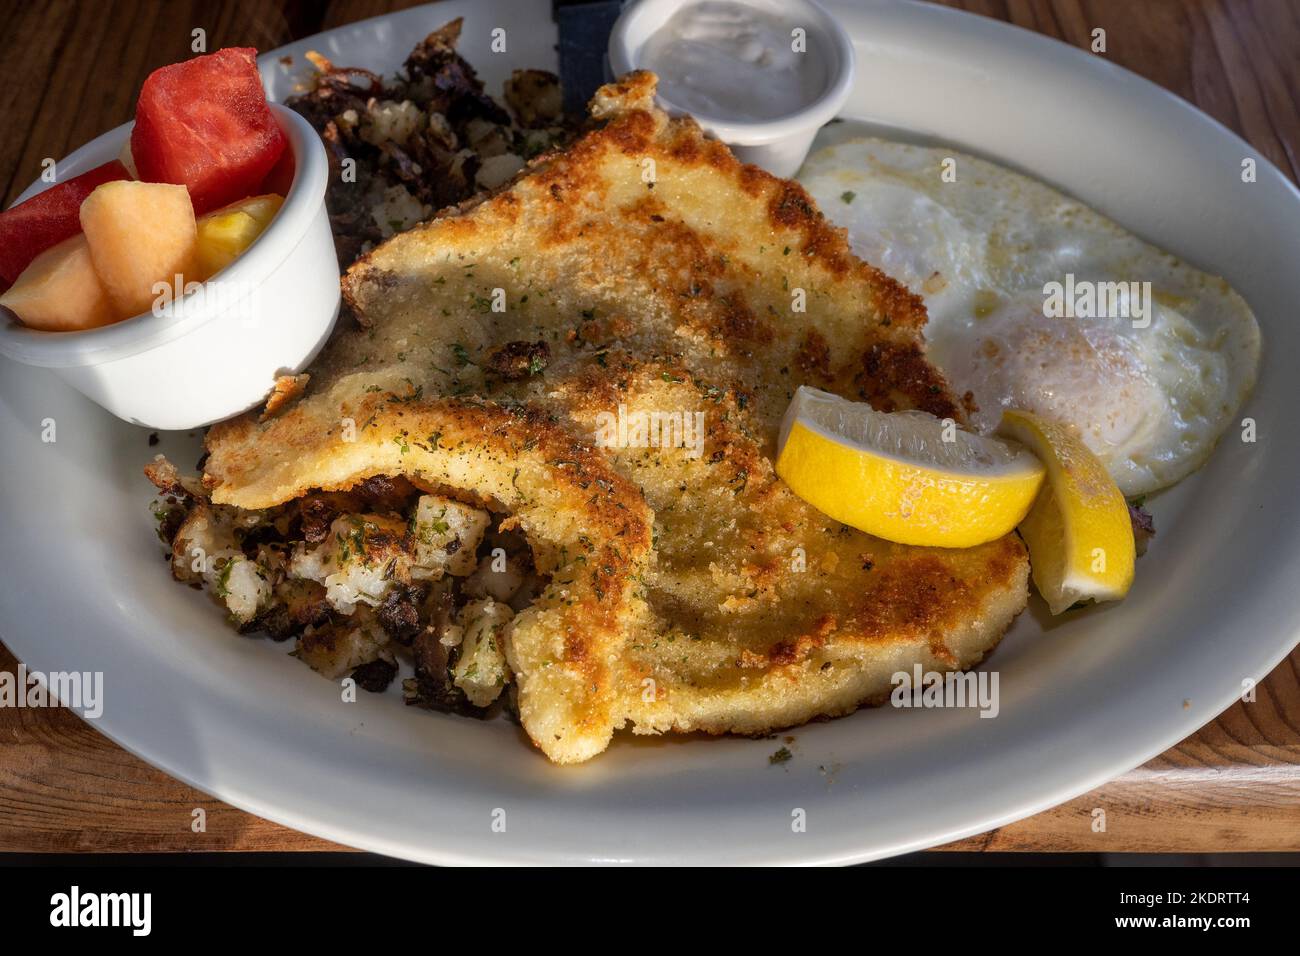 Seafood breakfast consisting of calamari steak, fried eggs, fruit and potato on white plate in a restaurant setting viewed from dinner angle Stock Photo